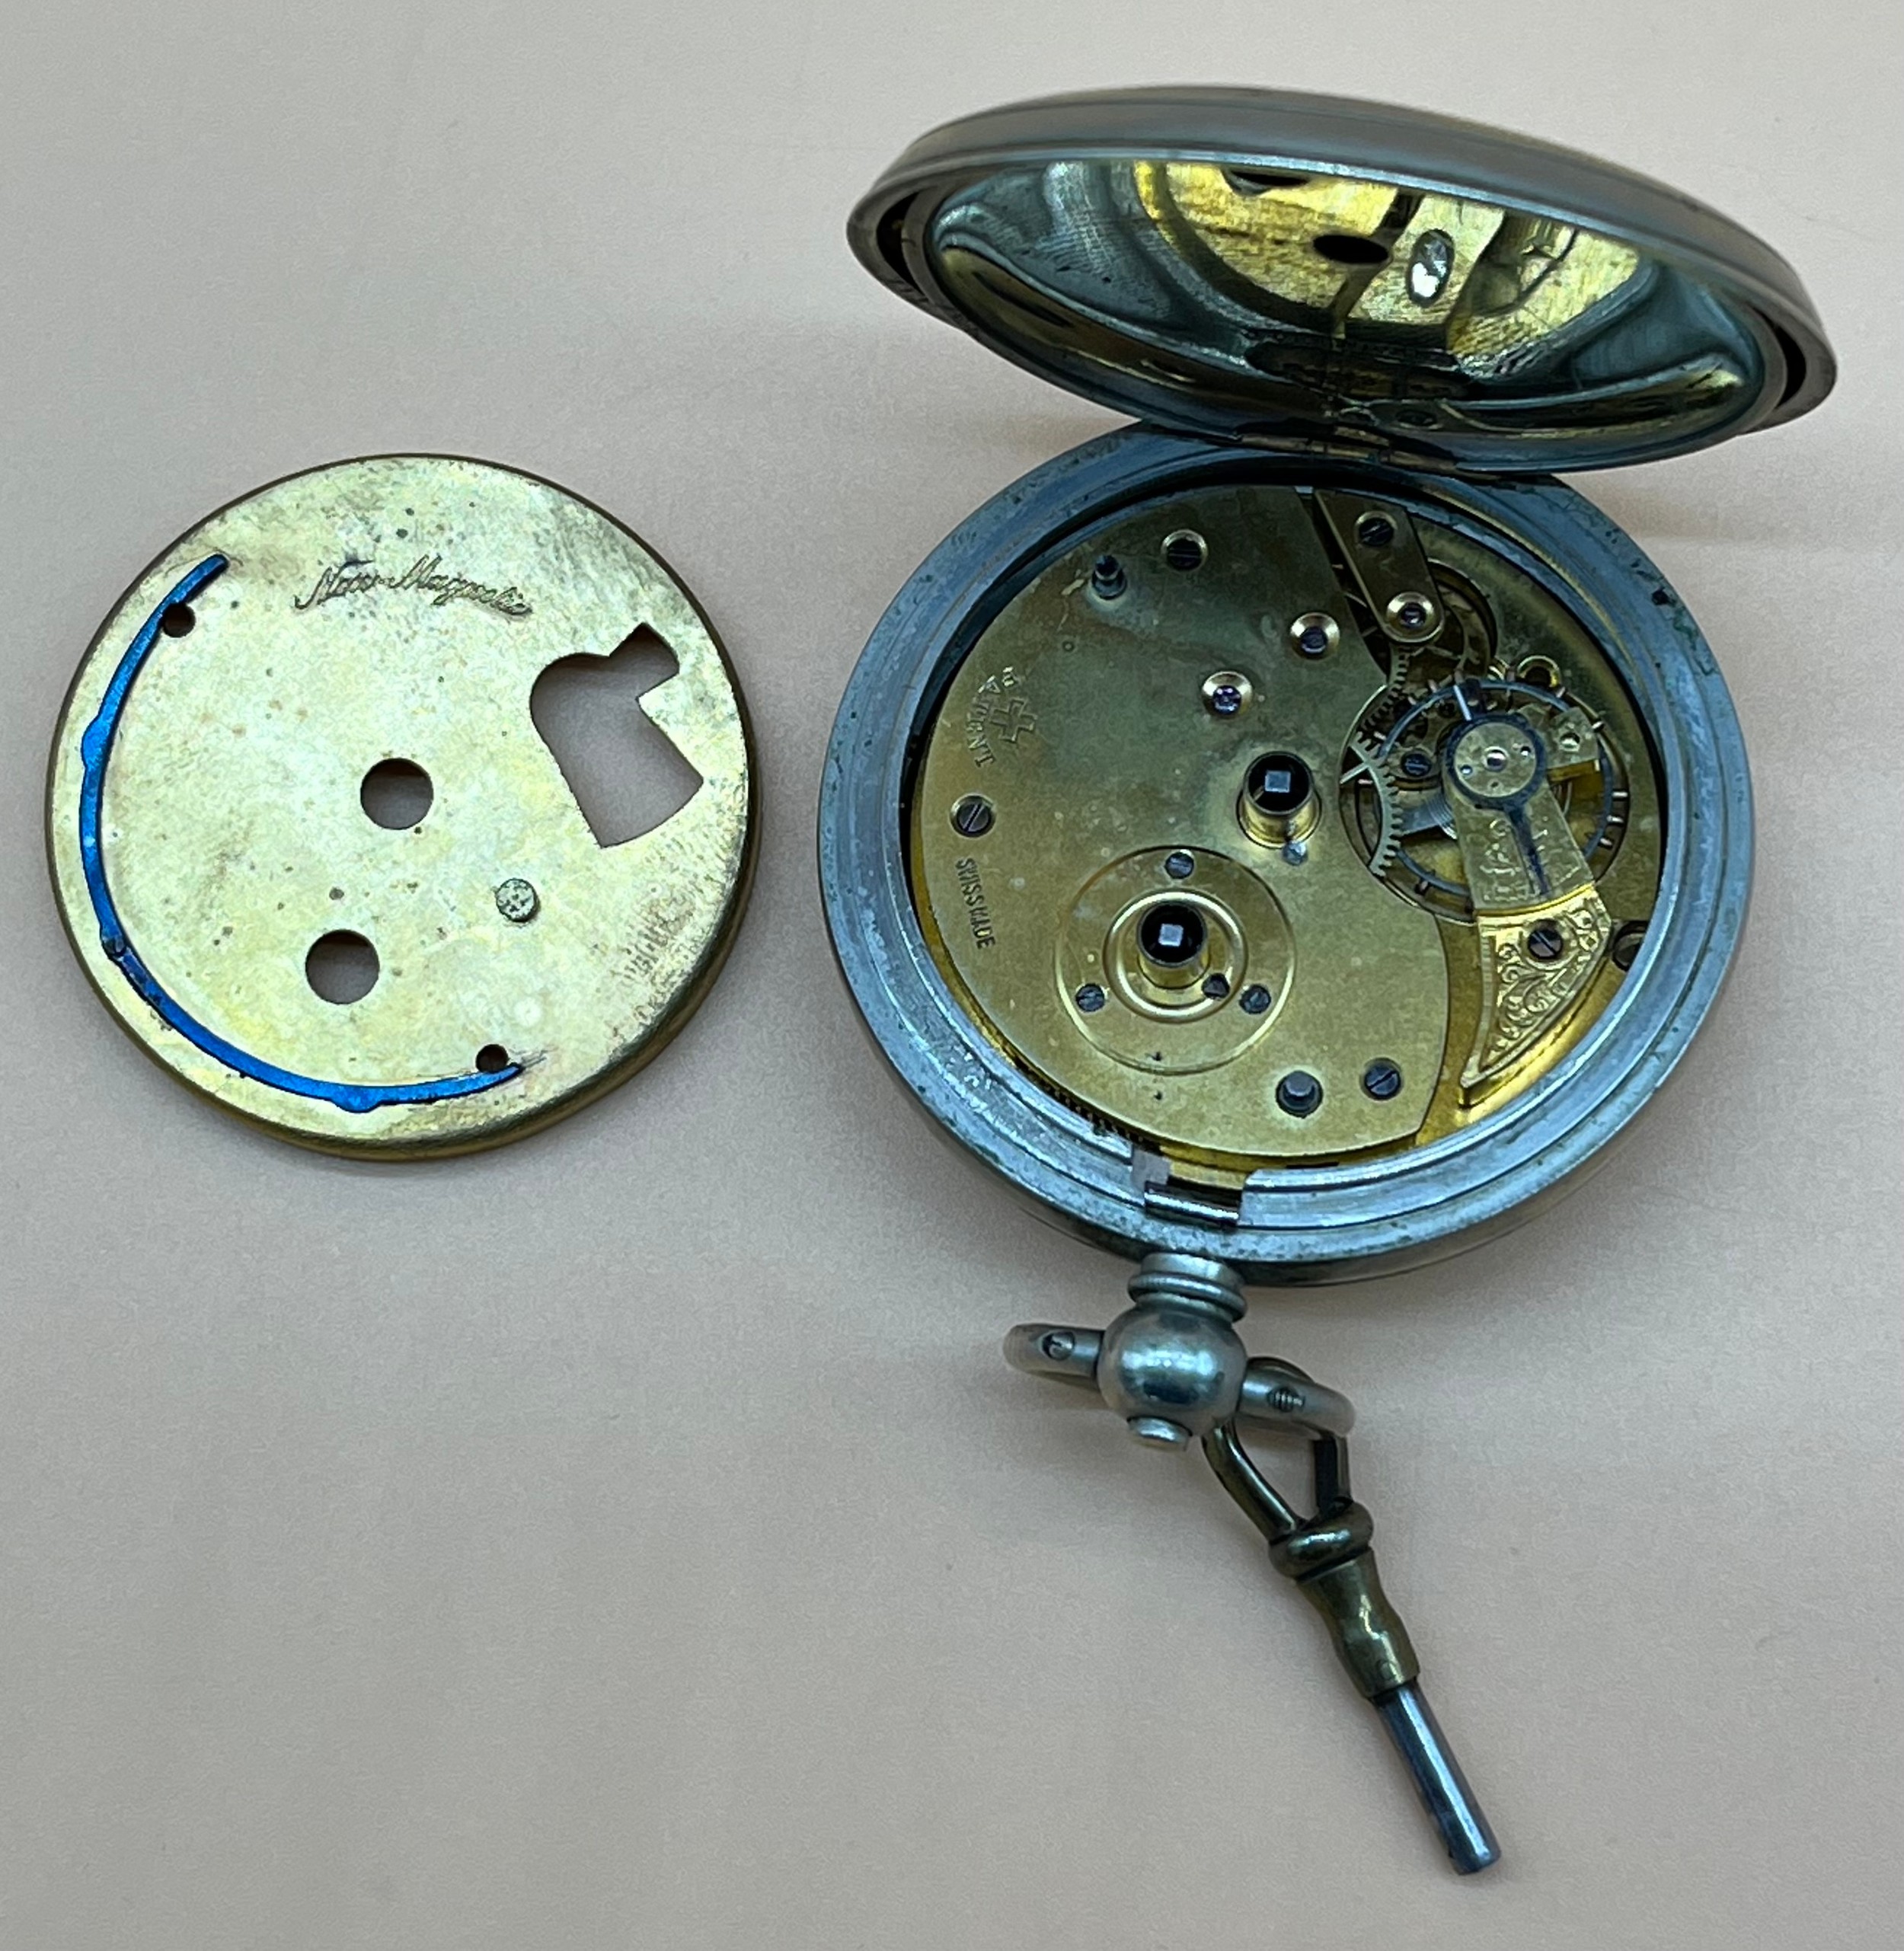 Antique pocket watch fitted within a nickel case, Enamel face. Swiss made New Magnetic. Comes with a - Image 2 of 4